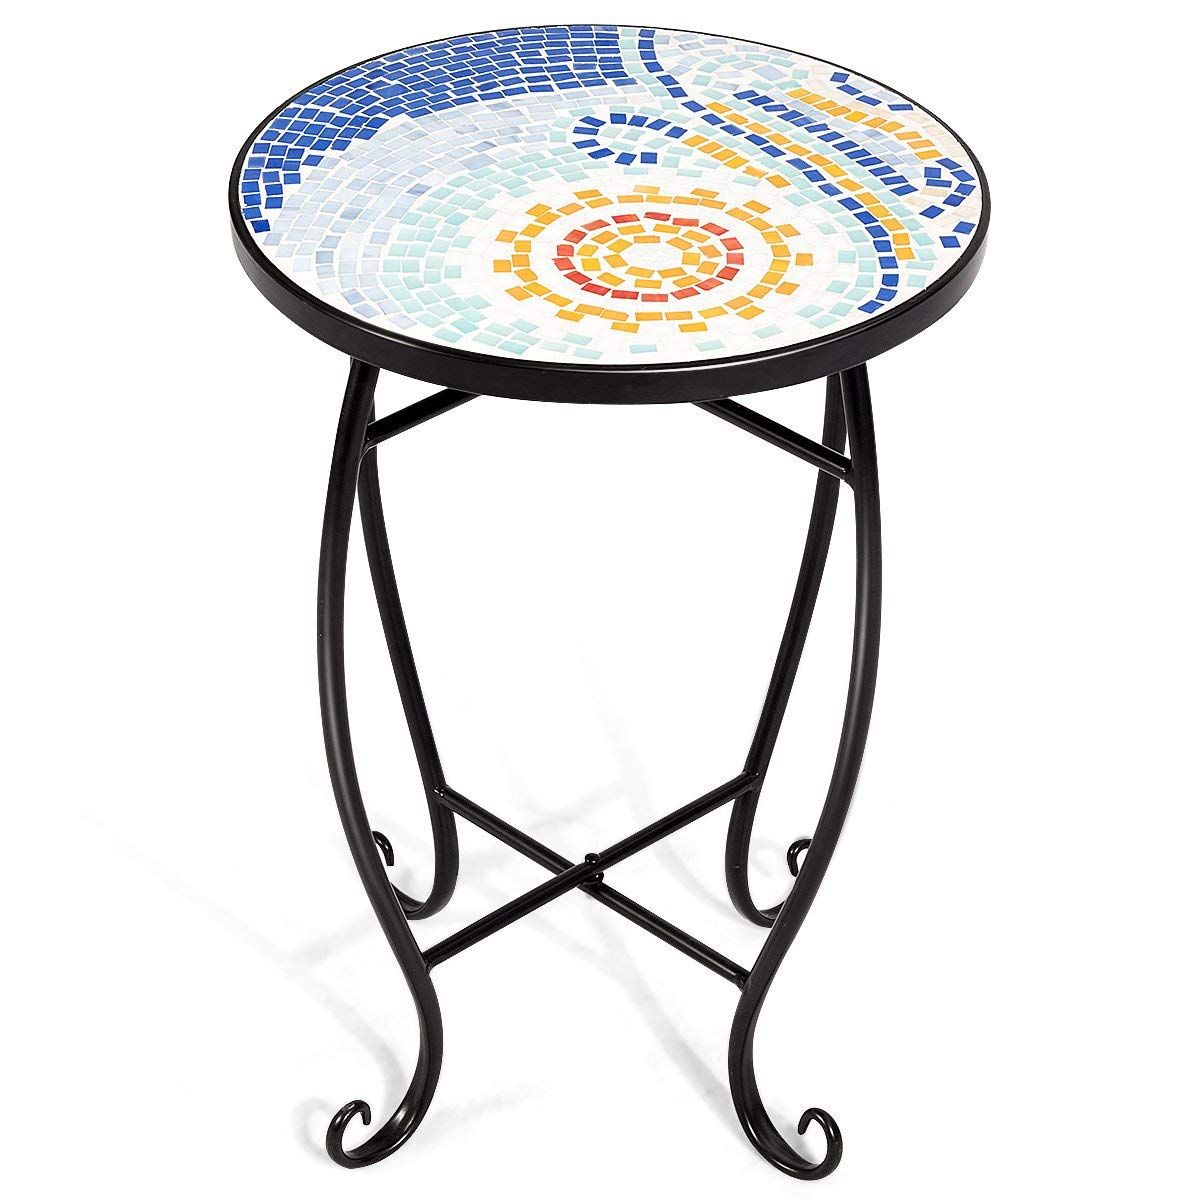 Buy Giantex Mosaic Round Side Accent Table Patio Plant Stand Porch Regarding Ocean Mosaic Outdoor Accent Tables (View 1 of 15)